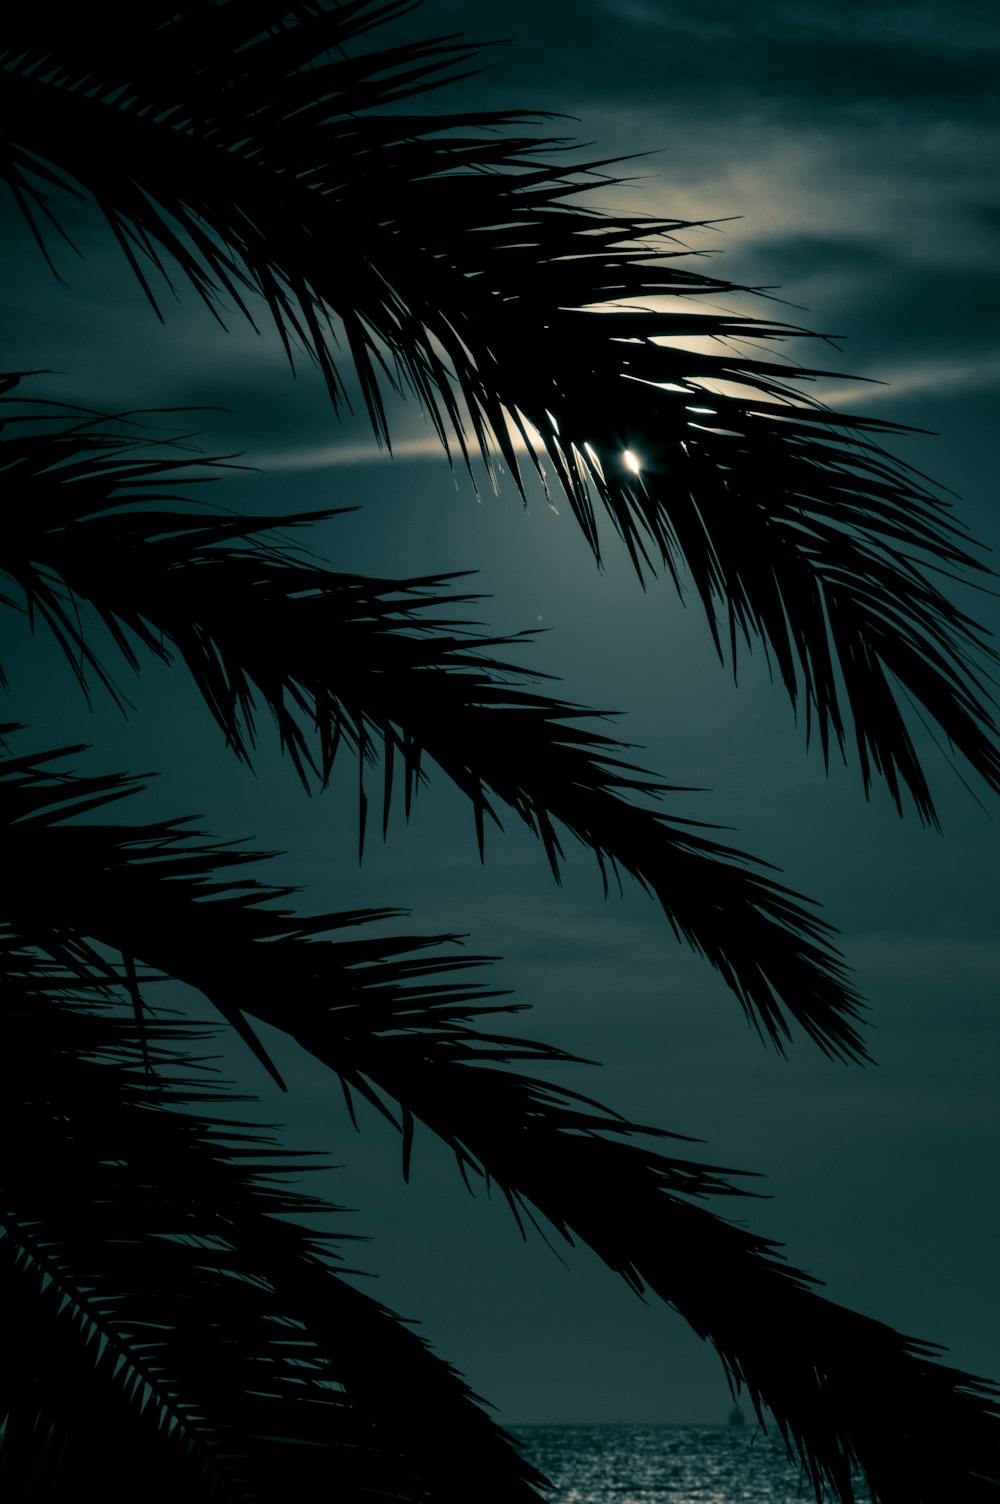 silhouette of palm tree at night time